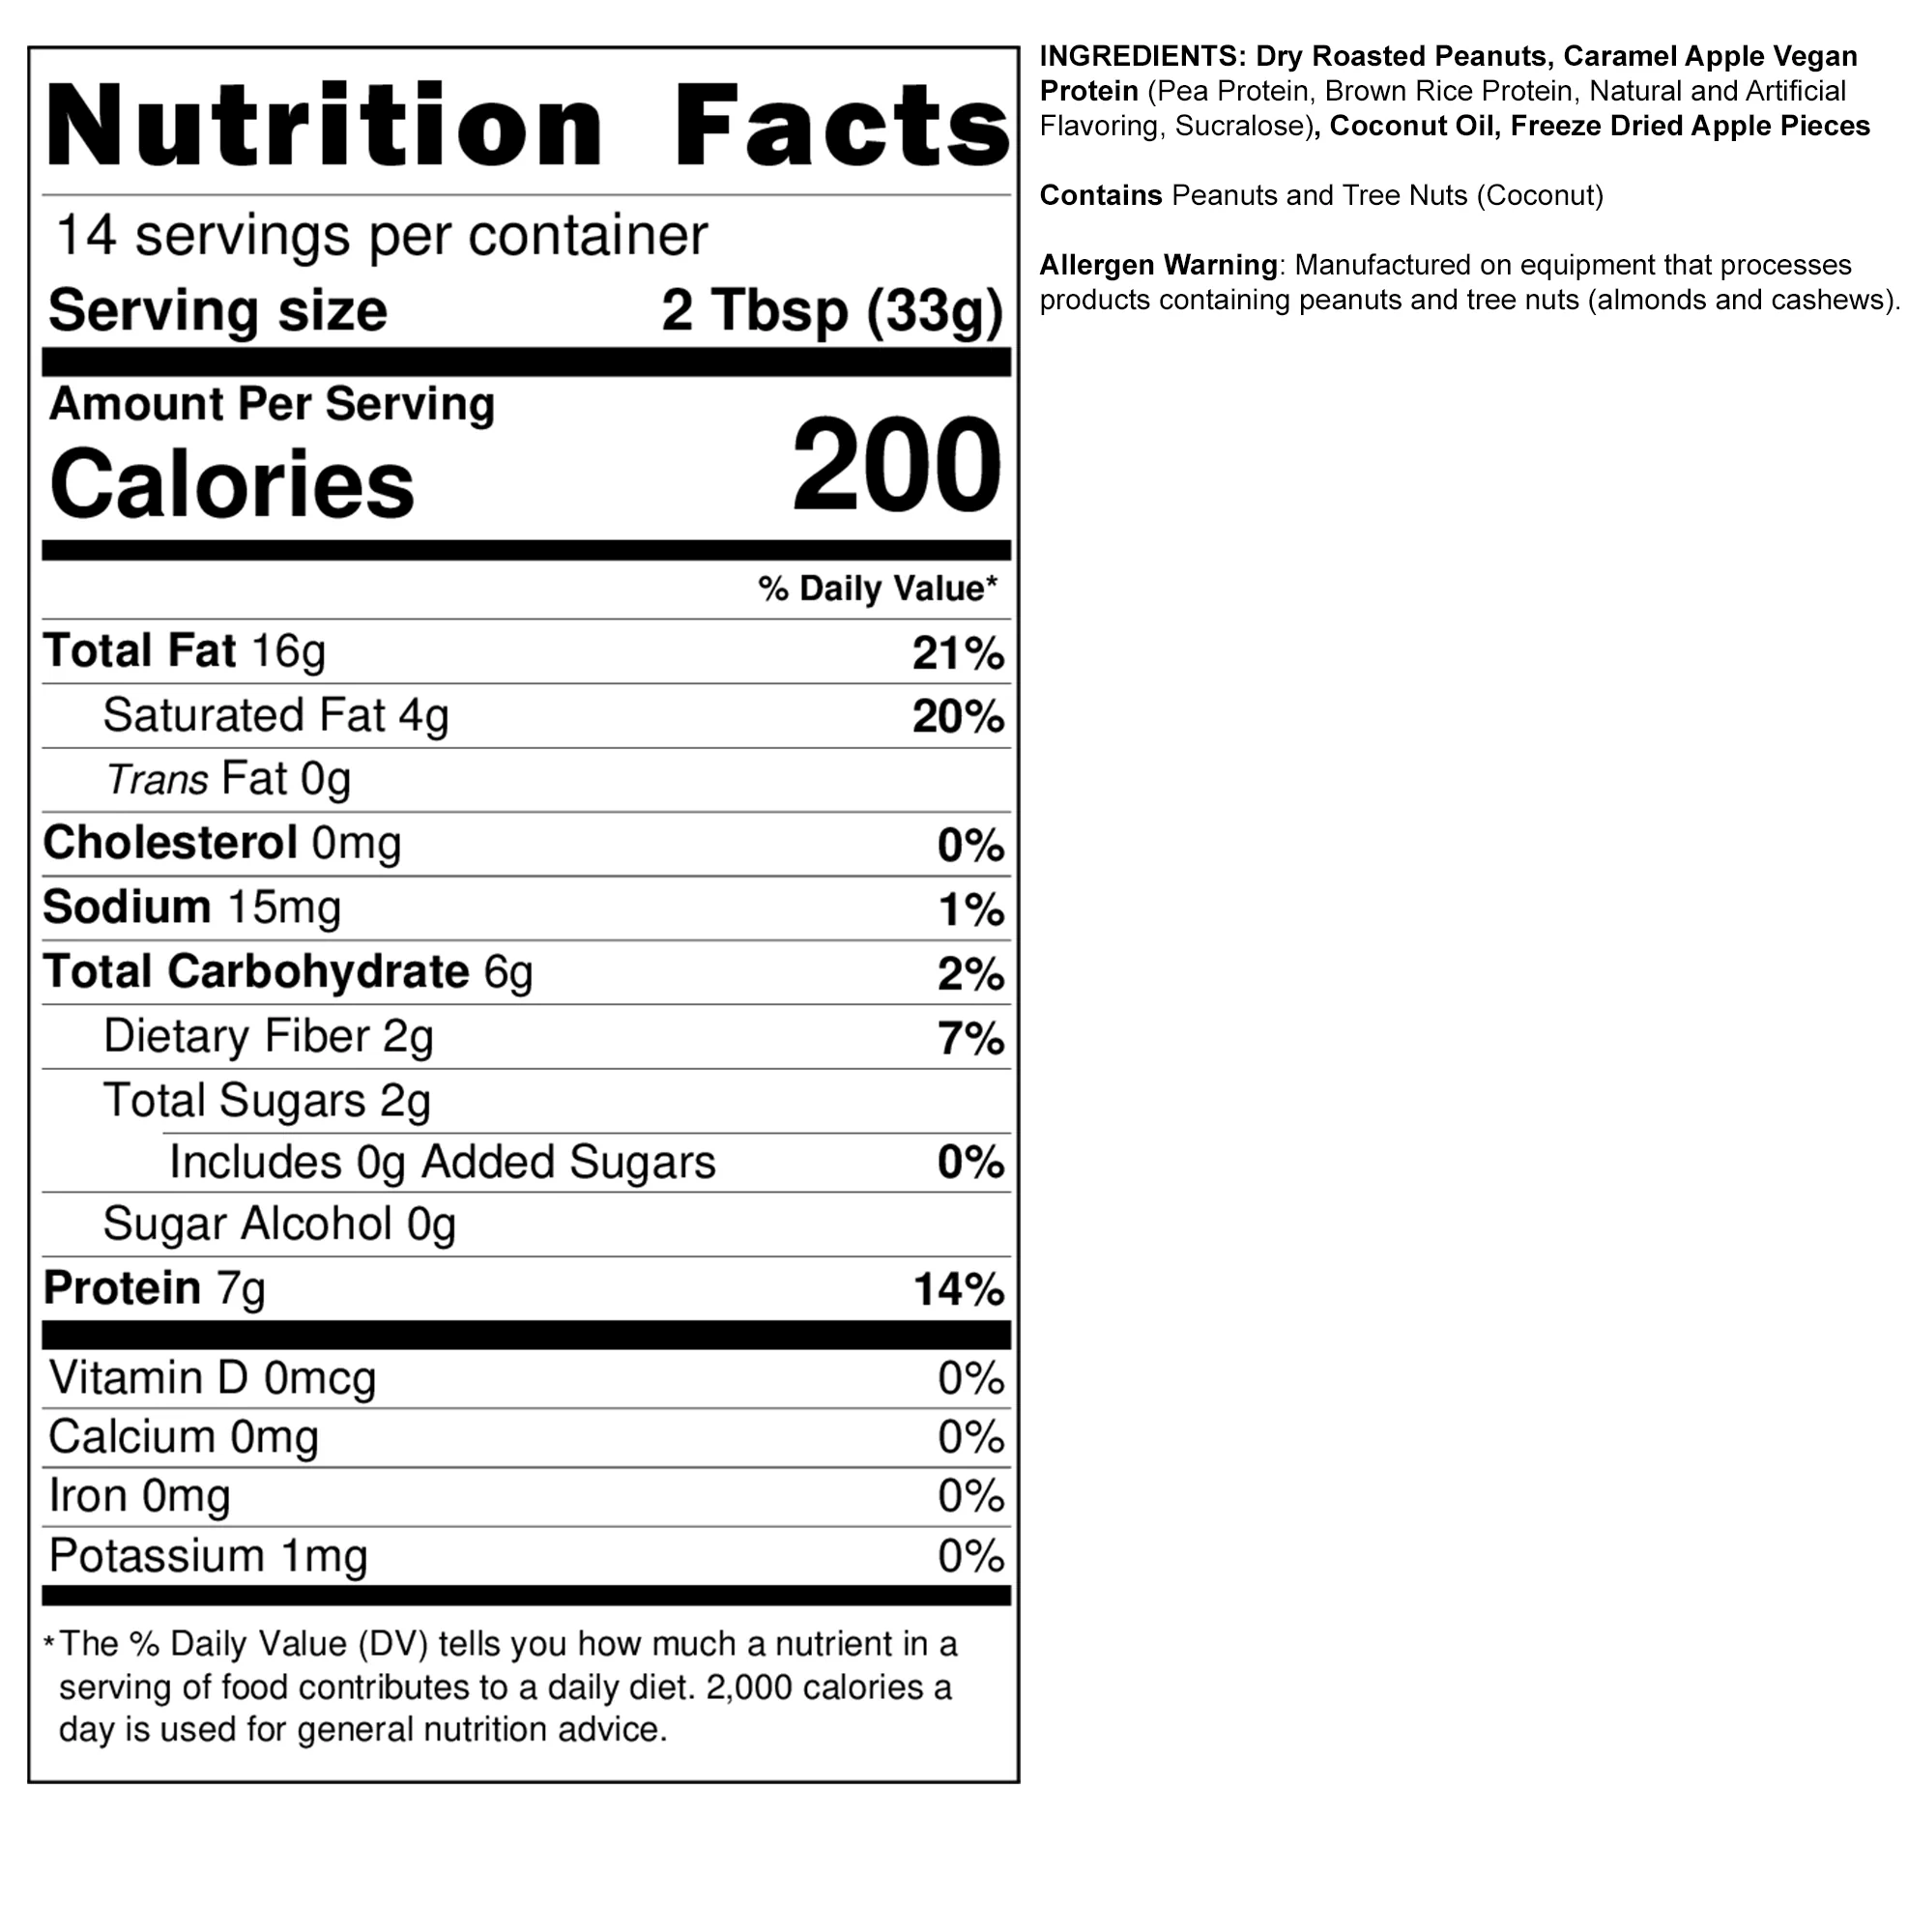 Nutrition facts for a product with 14 servings. Contains peanuts, caramel apple vegan protein, coconut oil, freeze-dried apples and allergy warning for tree nuts.